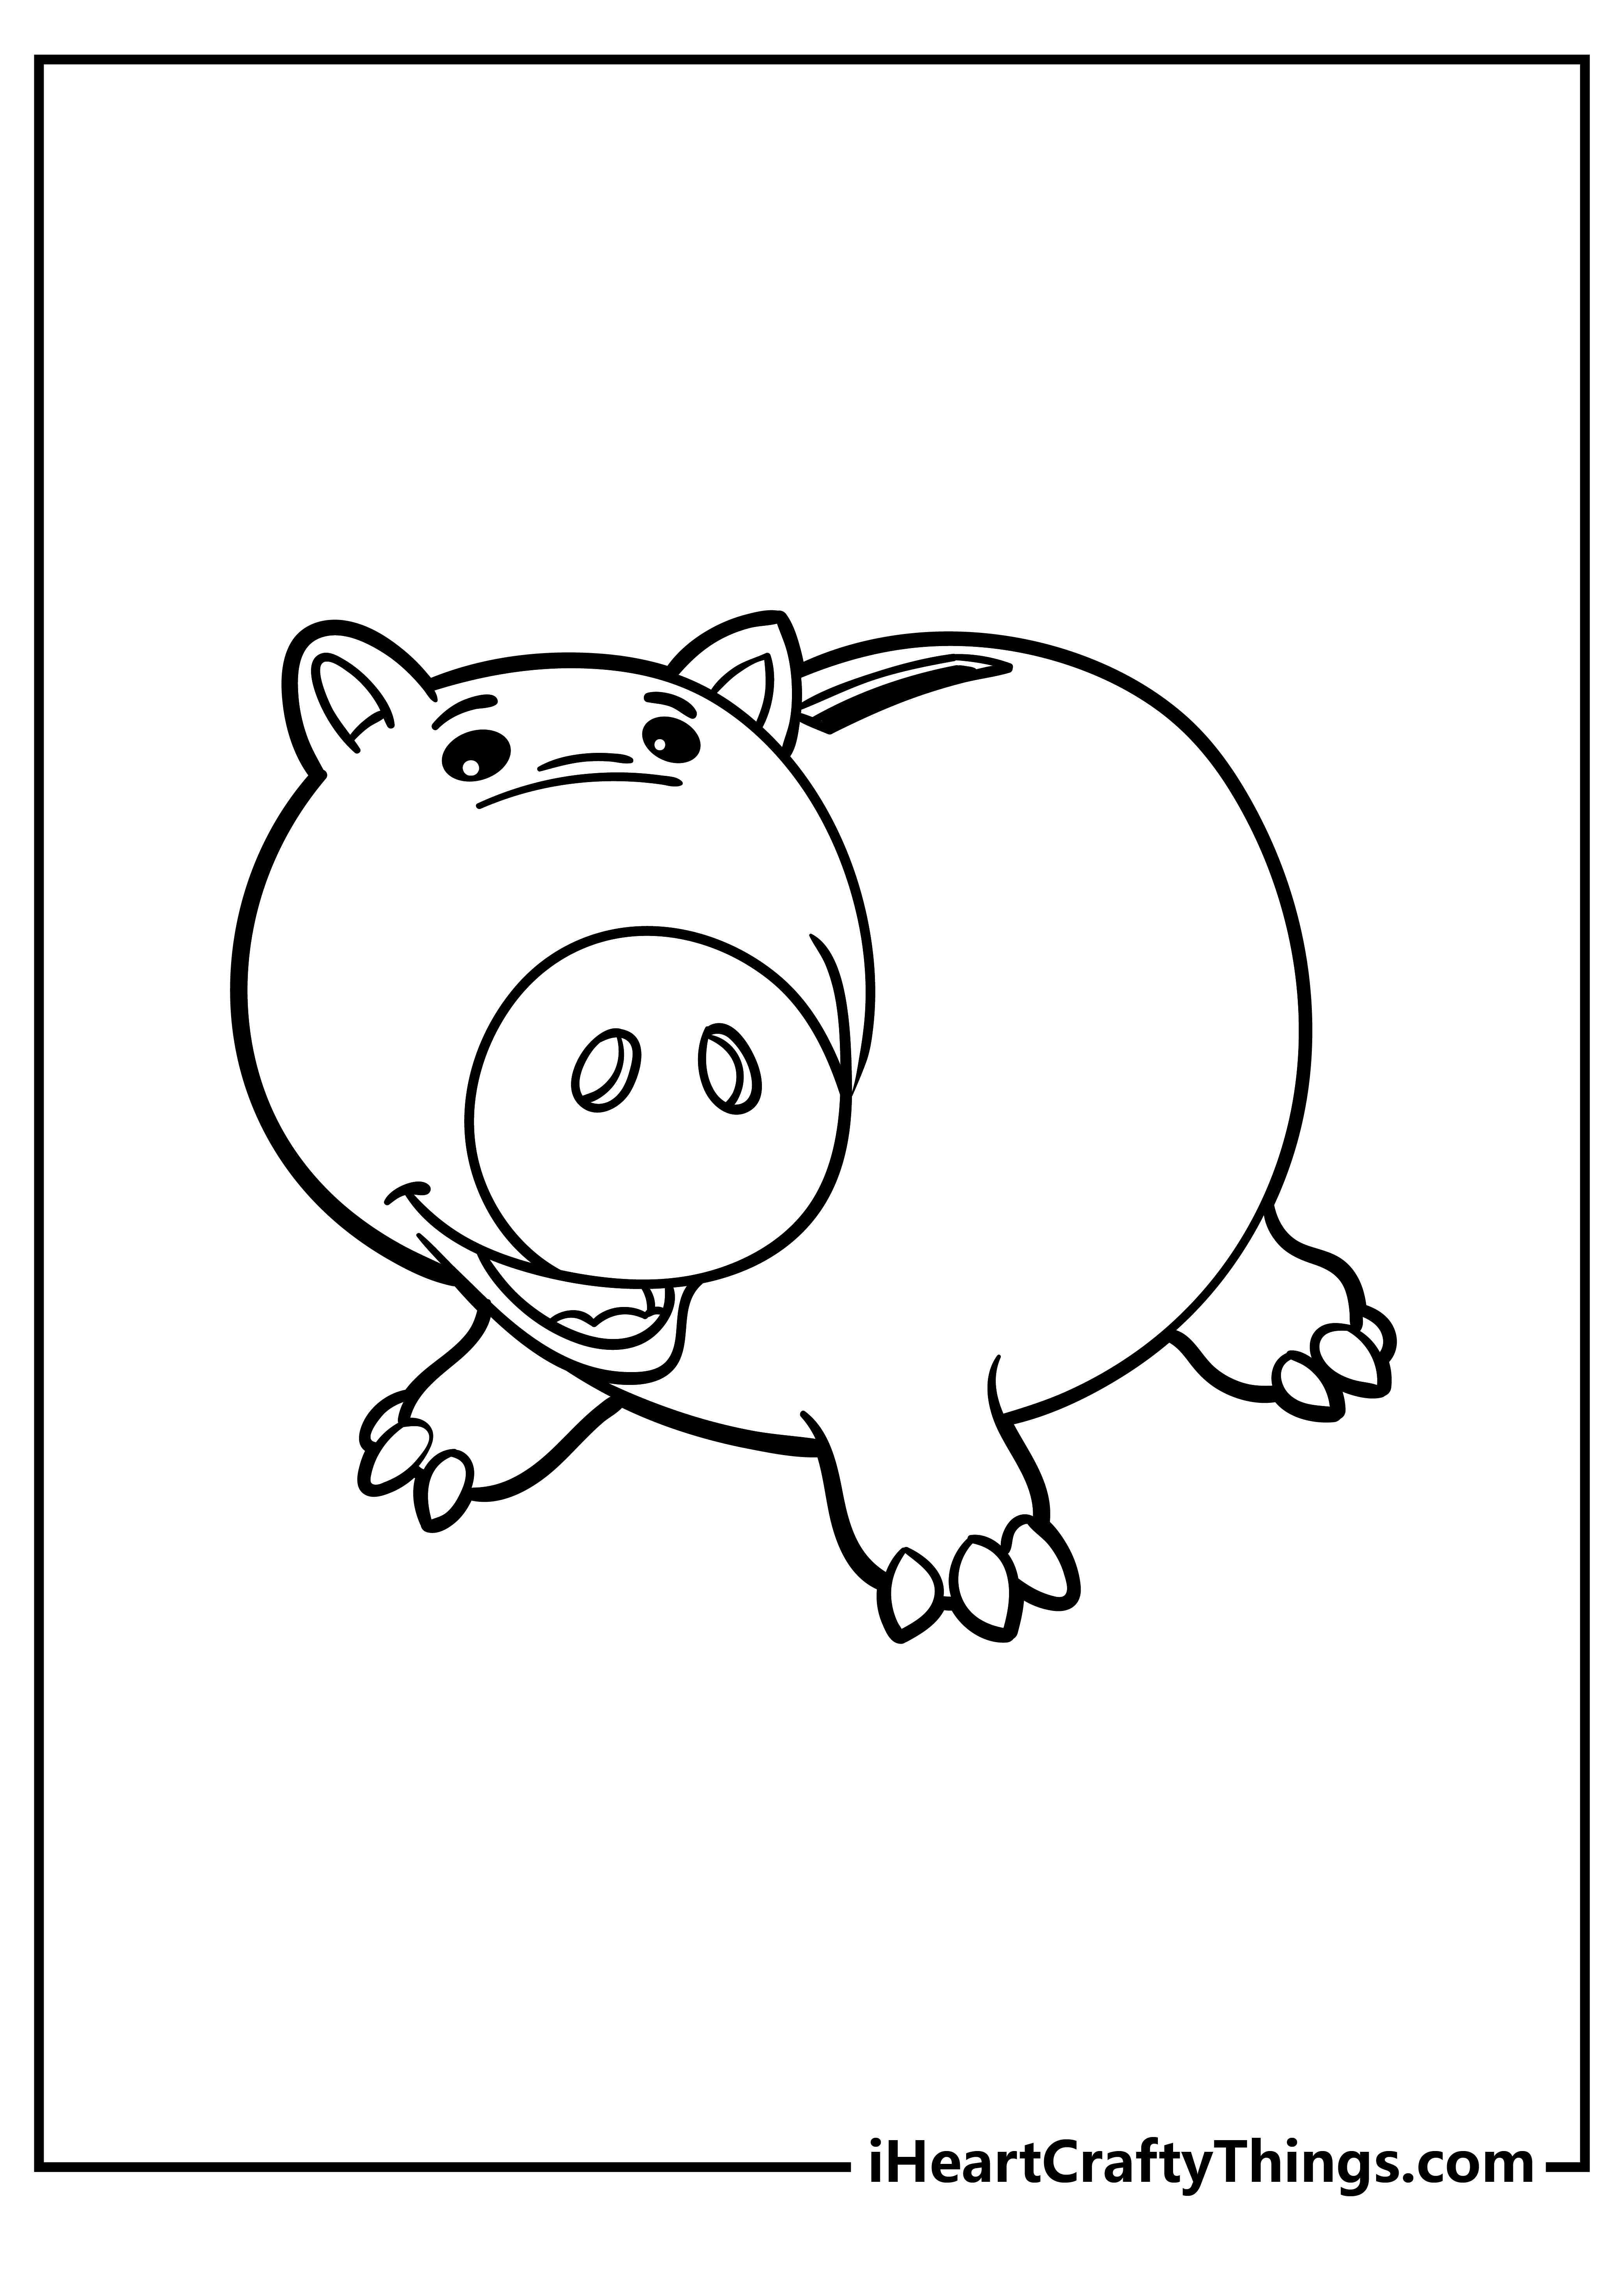 Toy Story Coloring Pages for kids free download